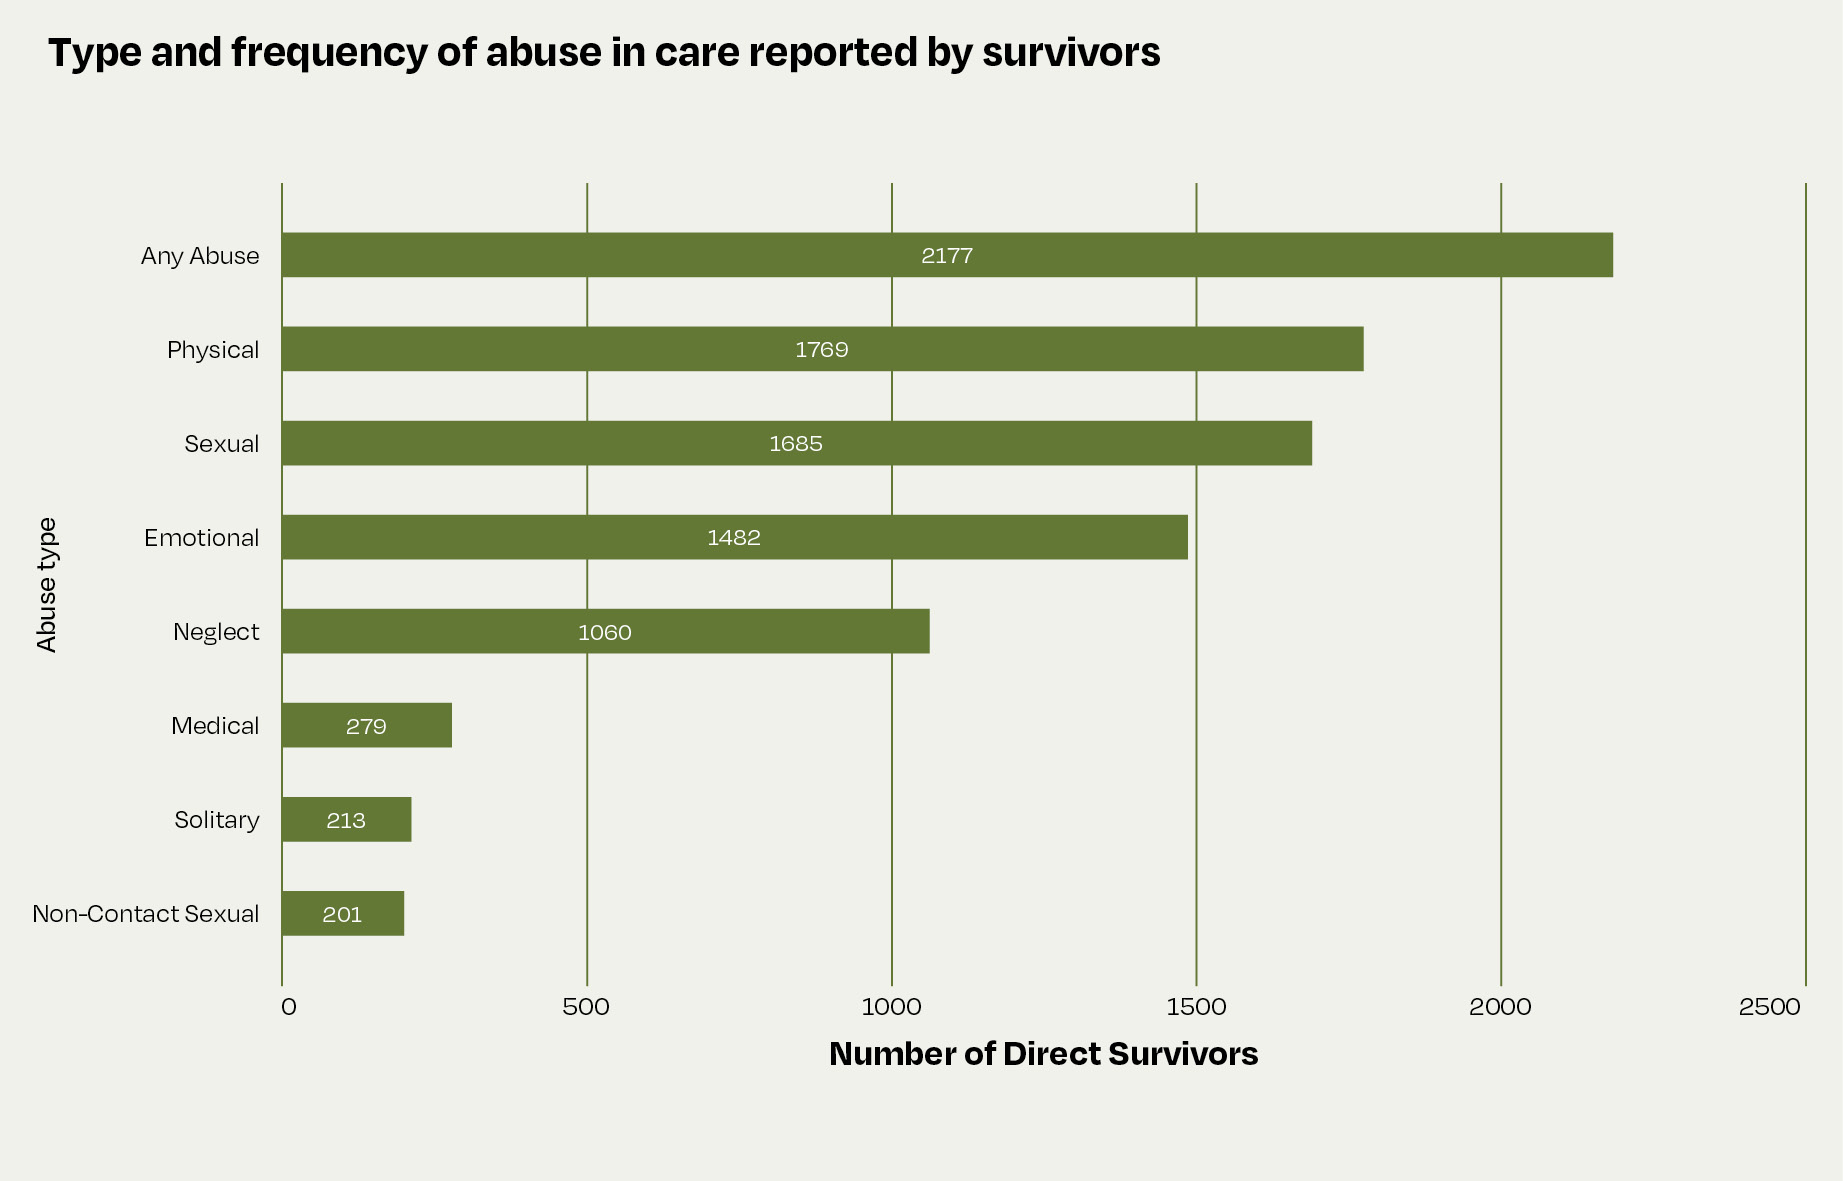 This bar graph shows the type and frequency of abuse experienced by survivors in care between 1950 and 1999. It shows that 2,177 survivors experienced some kind of abuse, 1,769 experienced physical abuse, 1,685 experienced sexual abuse, 1,482 experienced emotional abuse, 1,060 experienced neglect, 279 experienced medical abuse, 213 experienced solitary confinement, and 201 experienced non-contact sexual abuse. 